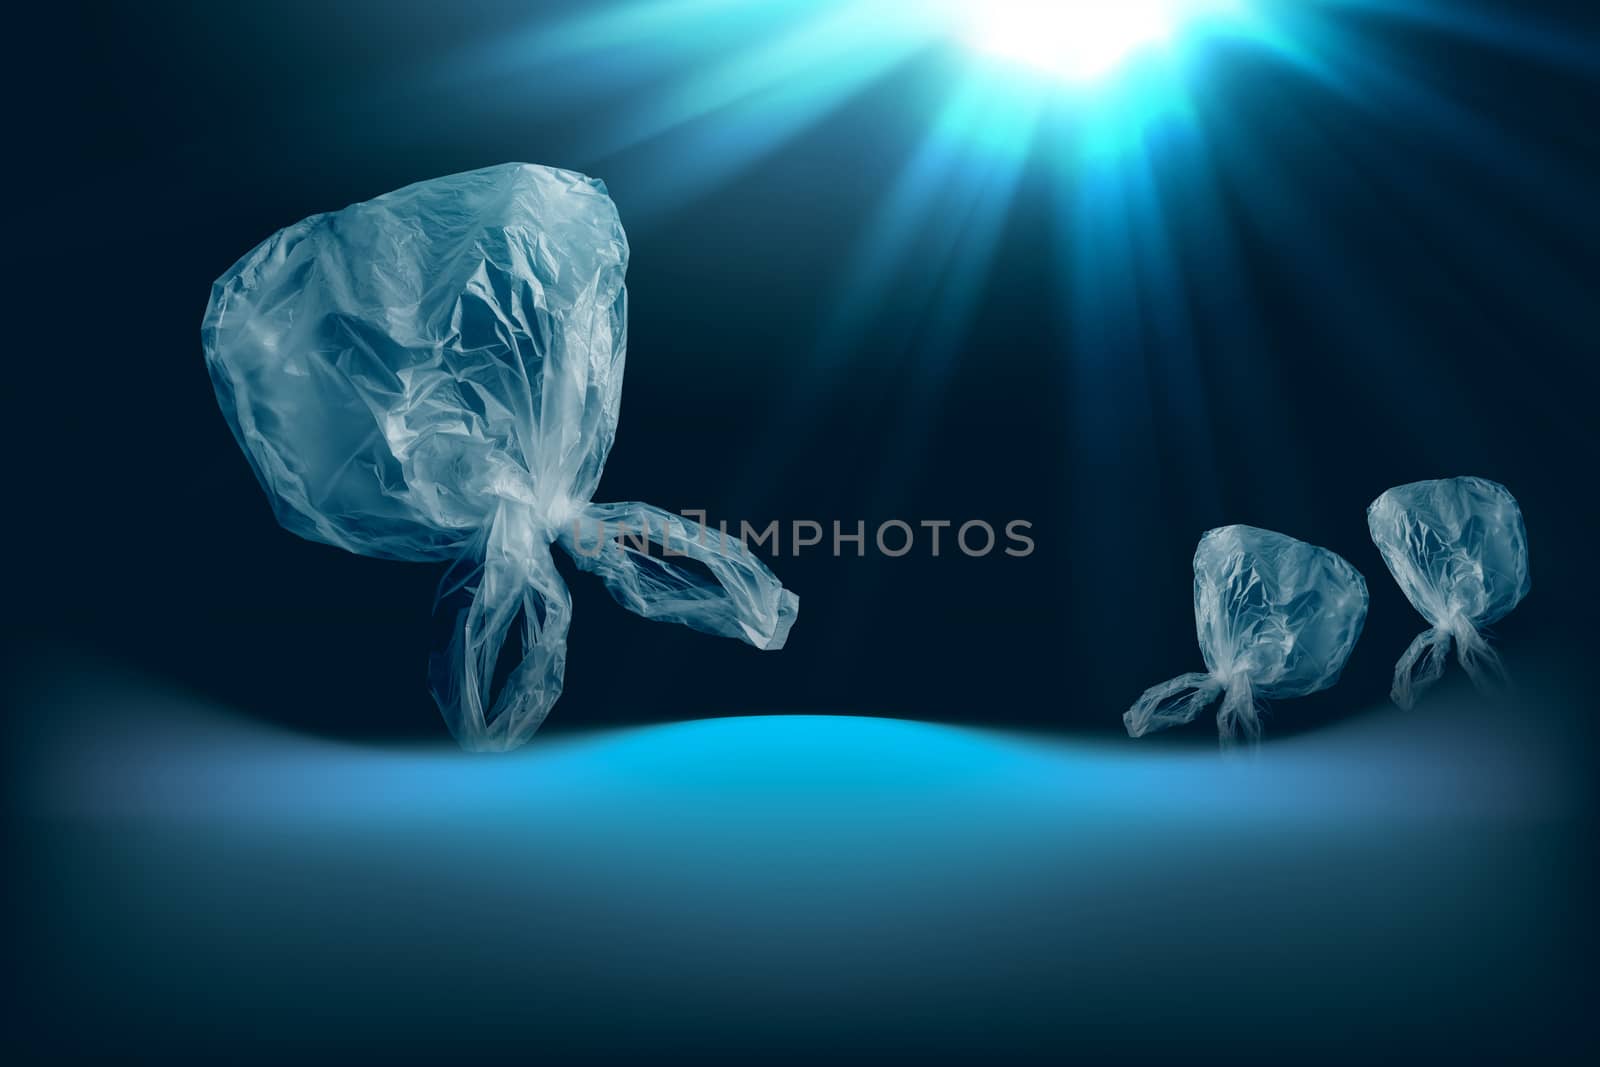 single-use transparent plastic bag in form of jellyfish floating in sea or ocean by happycreator